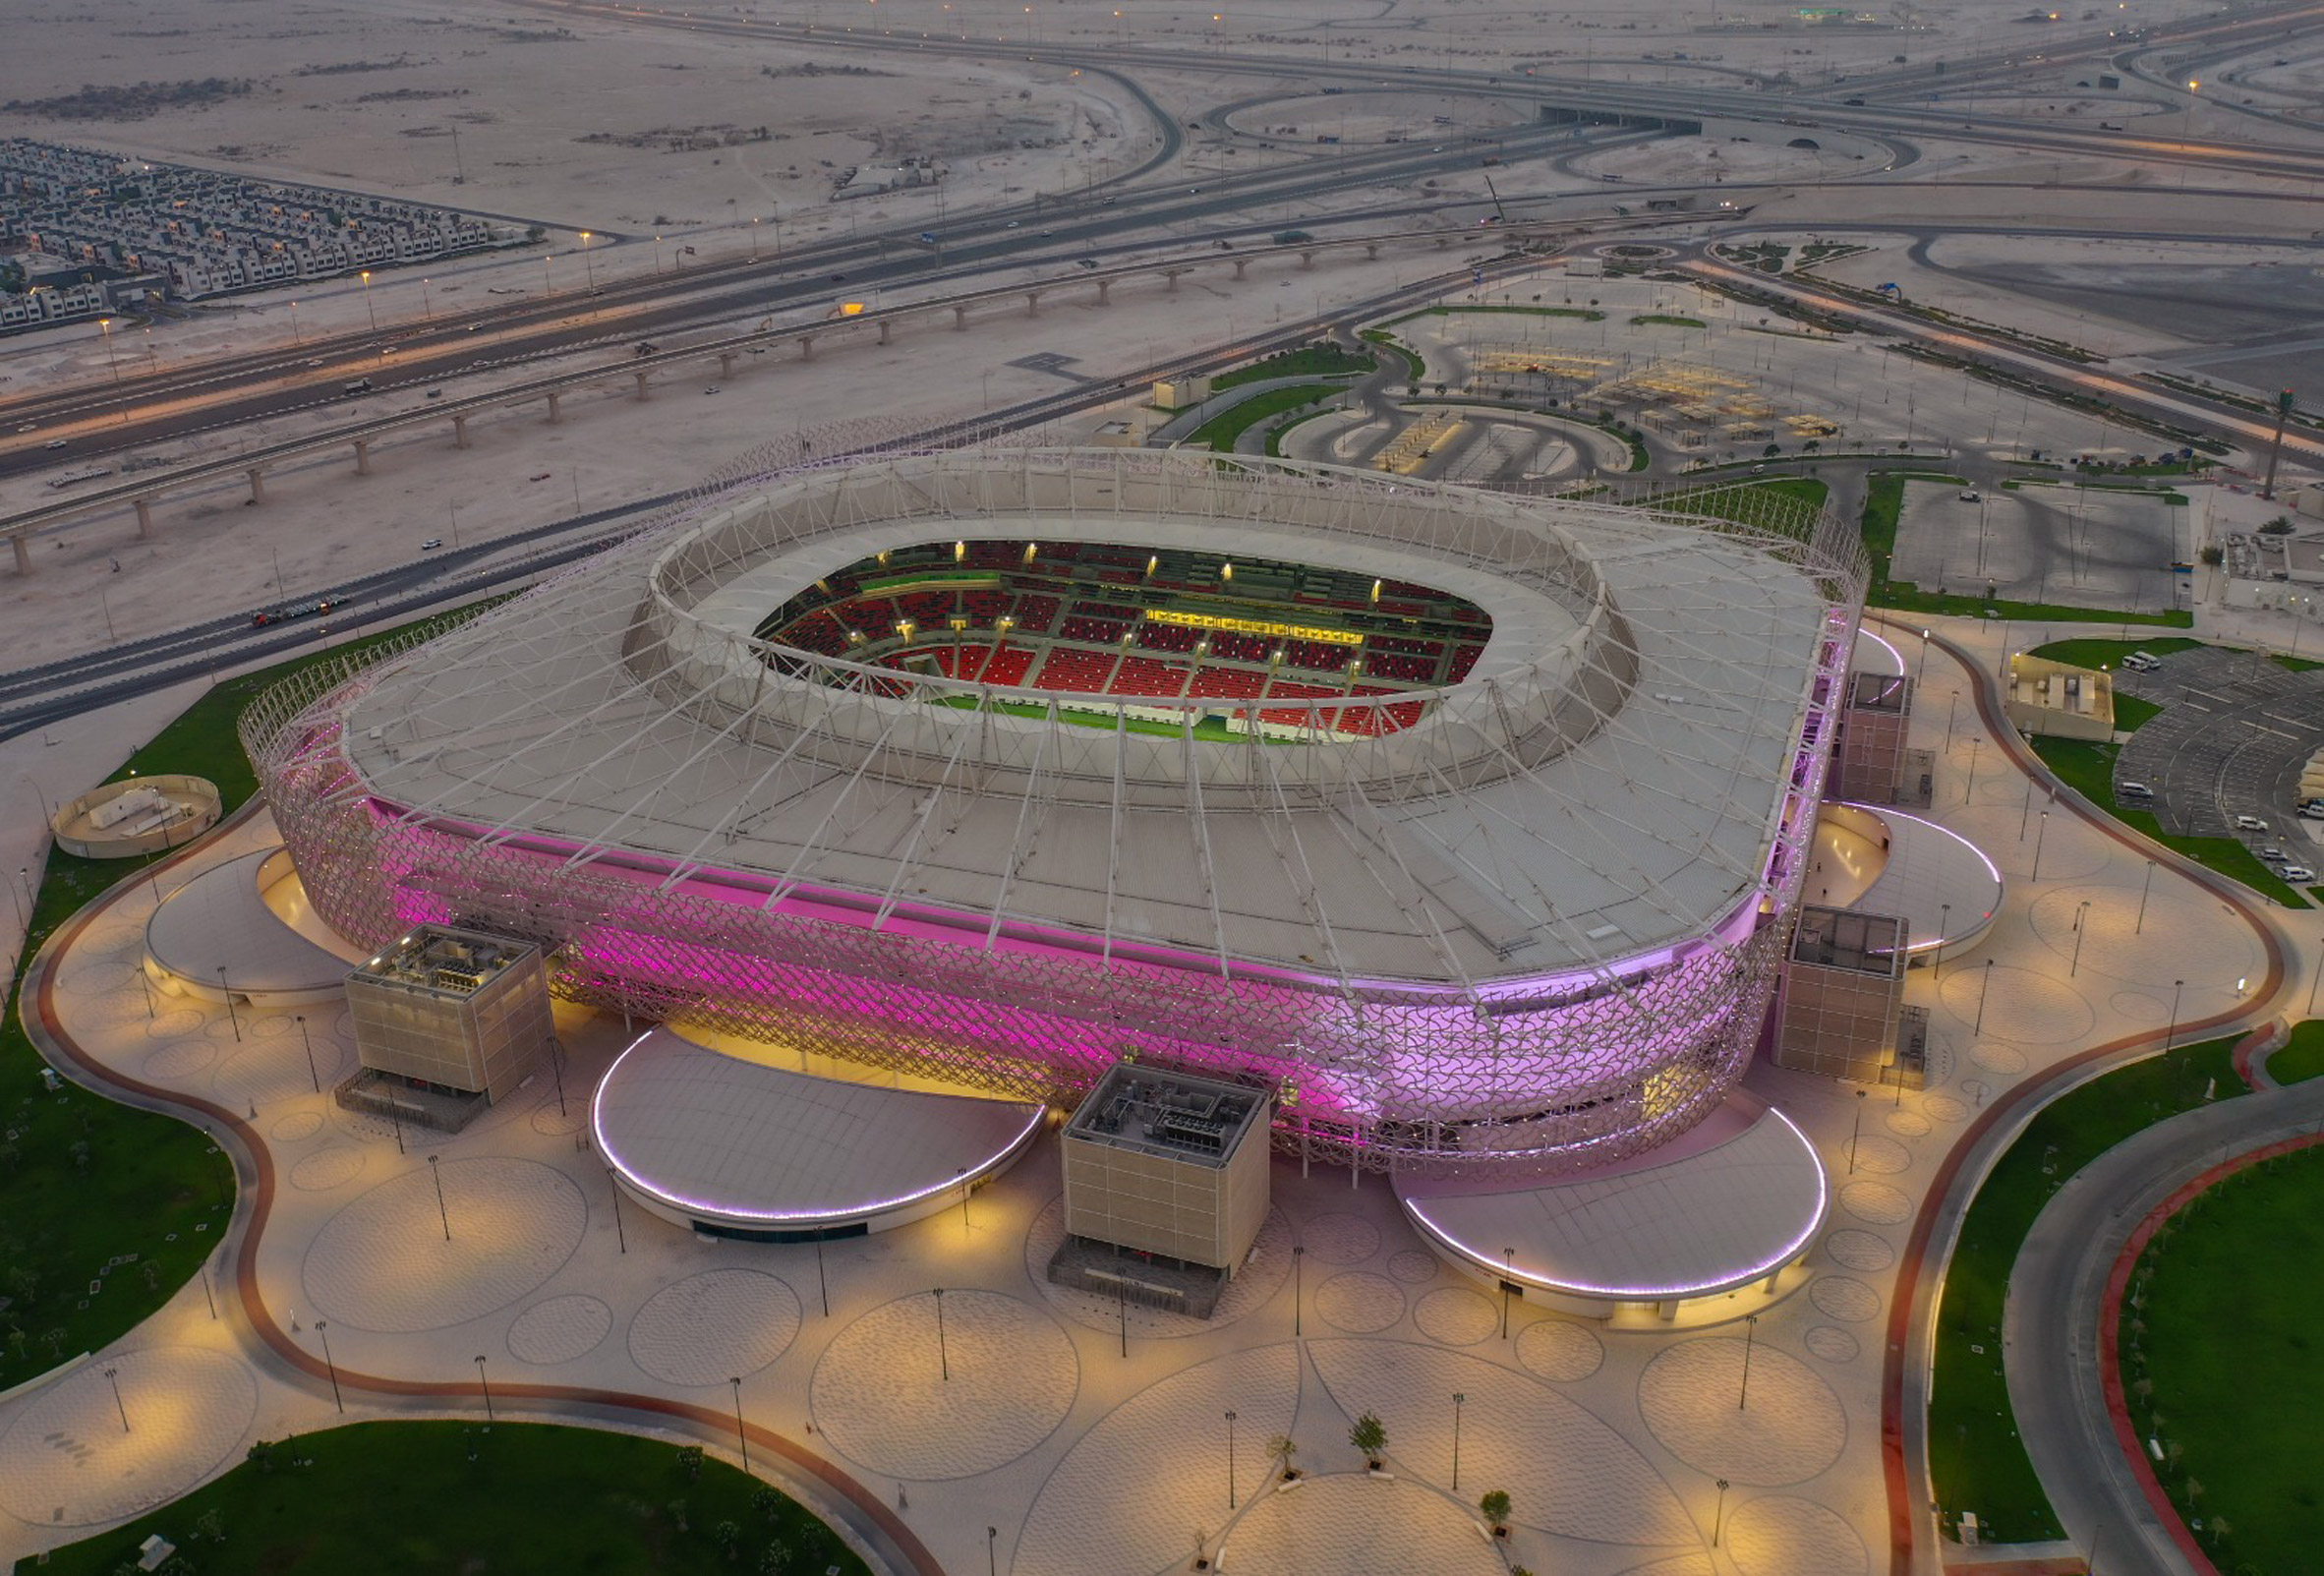 Ahmad Bin Ali Stadium by Pattern Design and Ramboll for the FIFA World Cup 2022